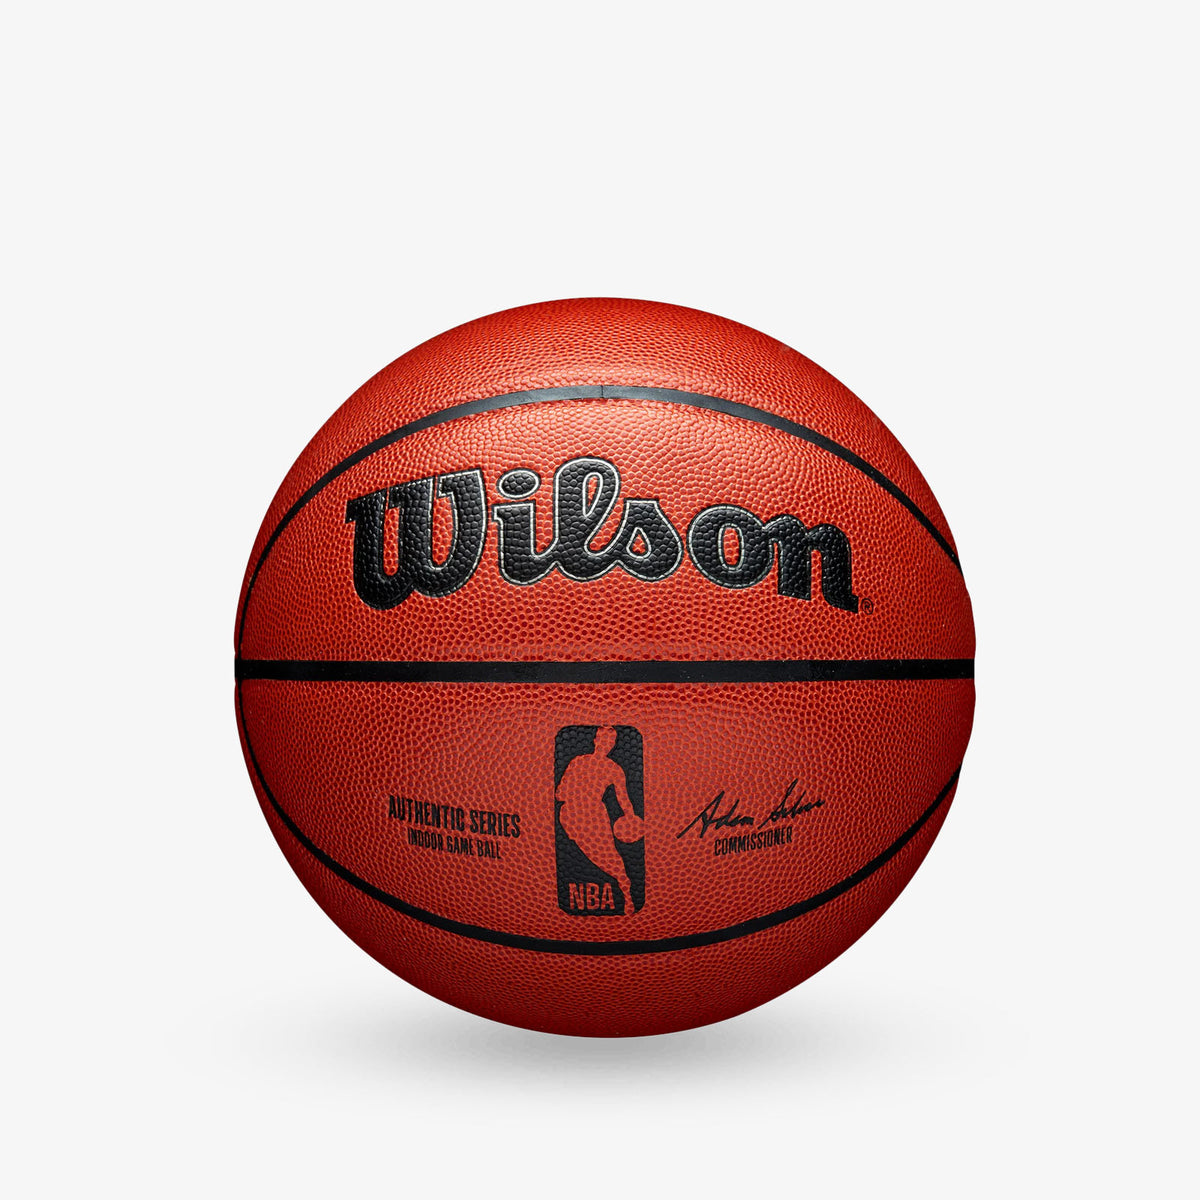 NBA Authentic Series Indoor Game Basketball - Size 5